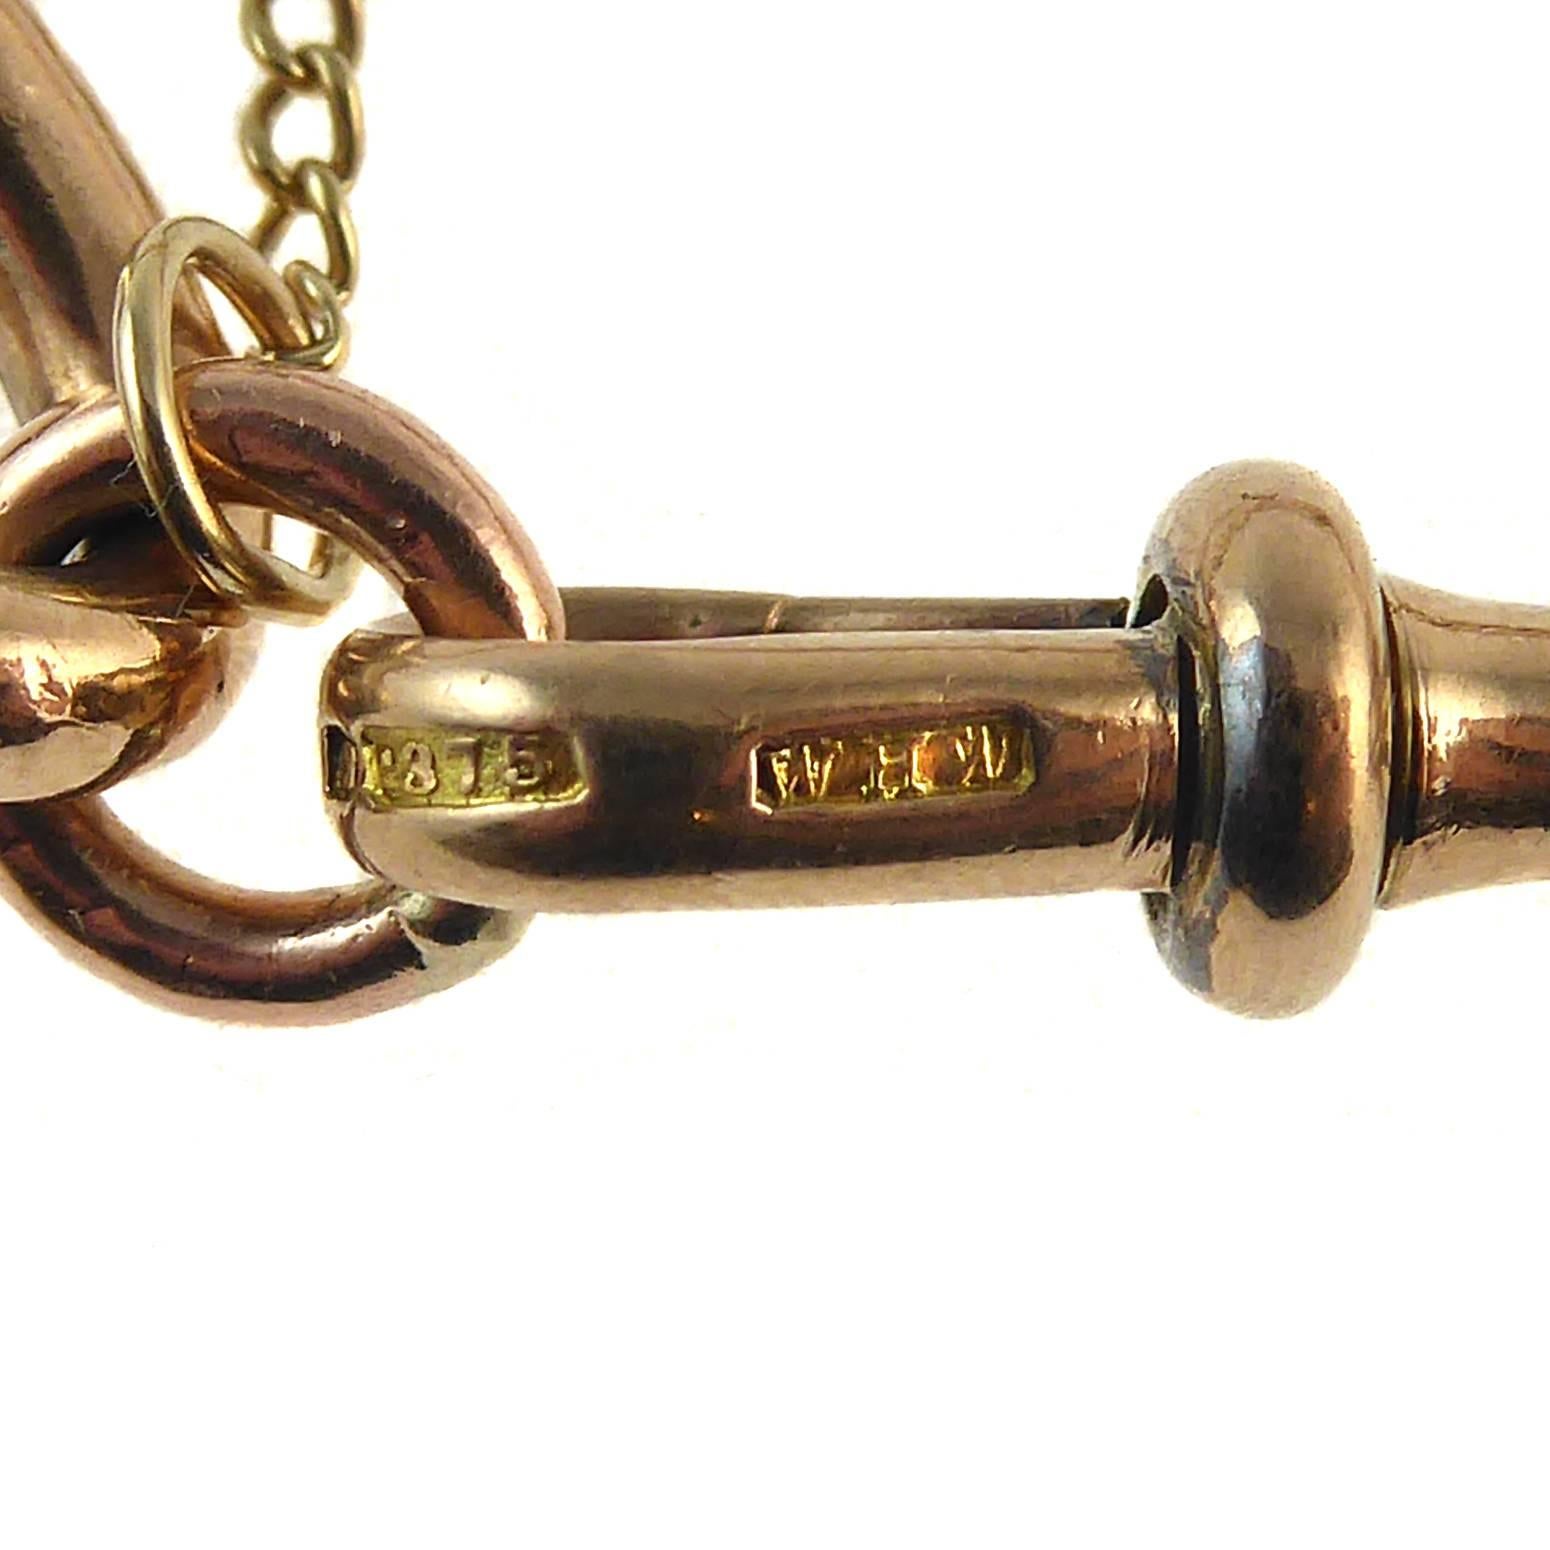 Created from a Victorian watch Albert chain, this old gold bracelet comprises elongated oval links with an approximate total length of 8.5 inches.  Fastening with the typical swivel, or dog, clip catch, the bracelet also has the added benefit of a